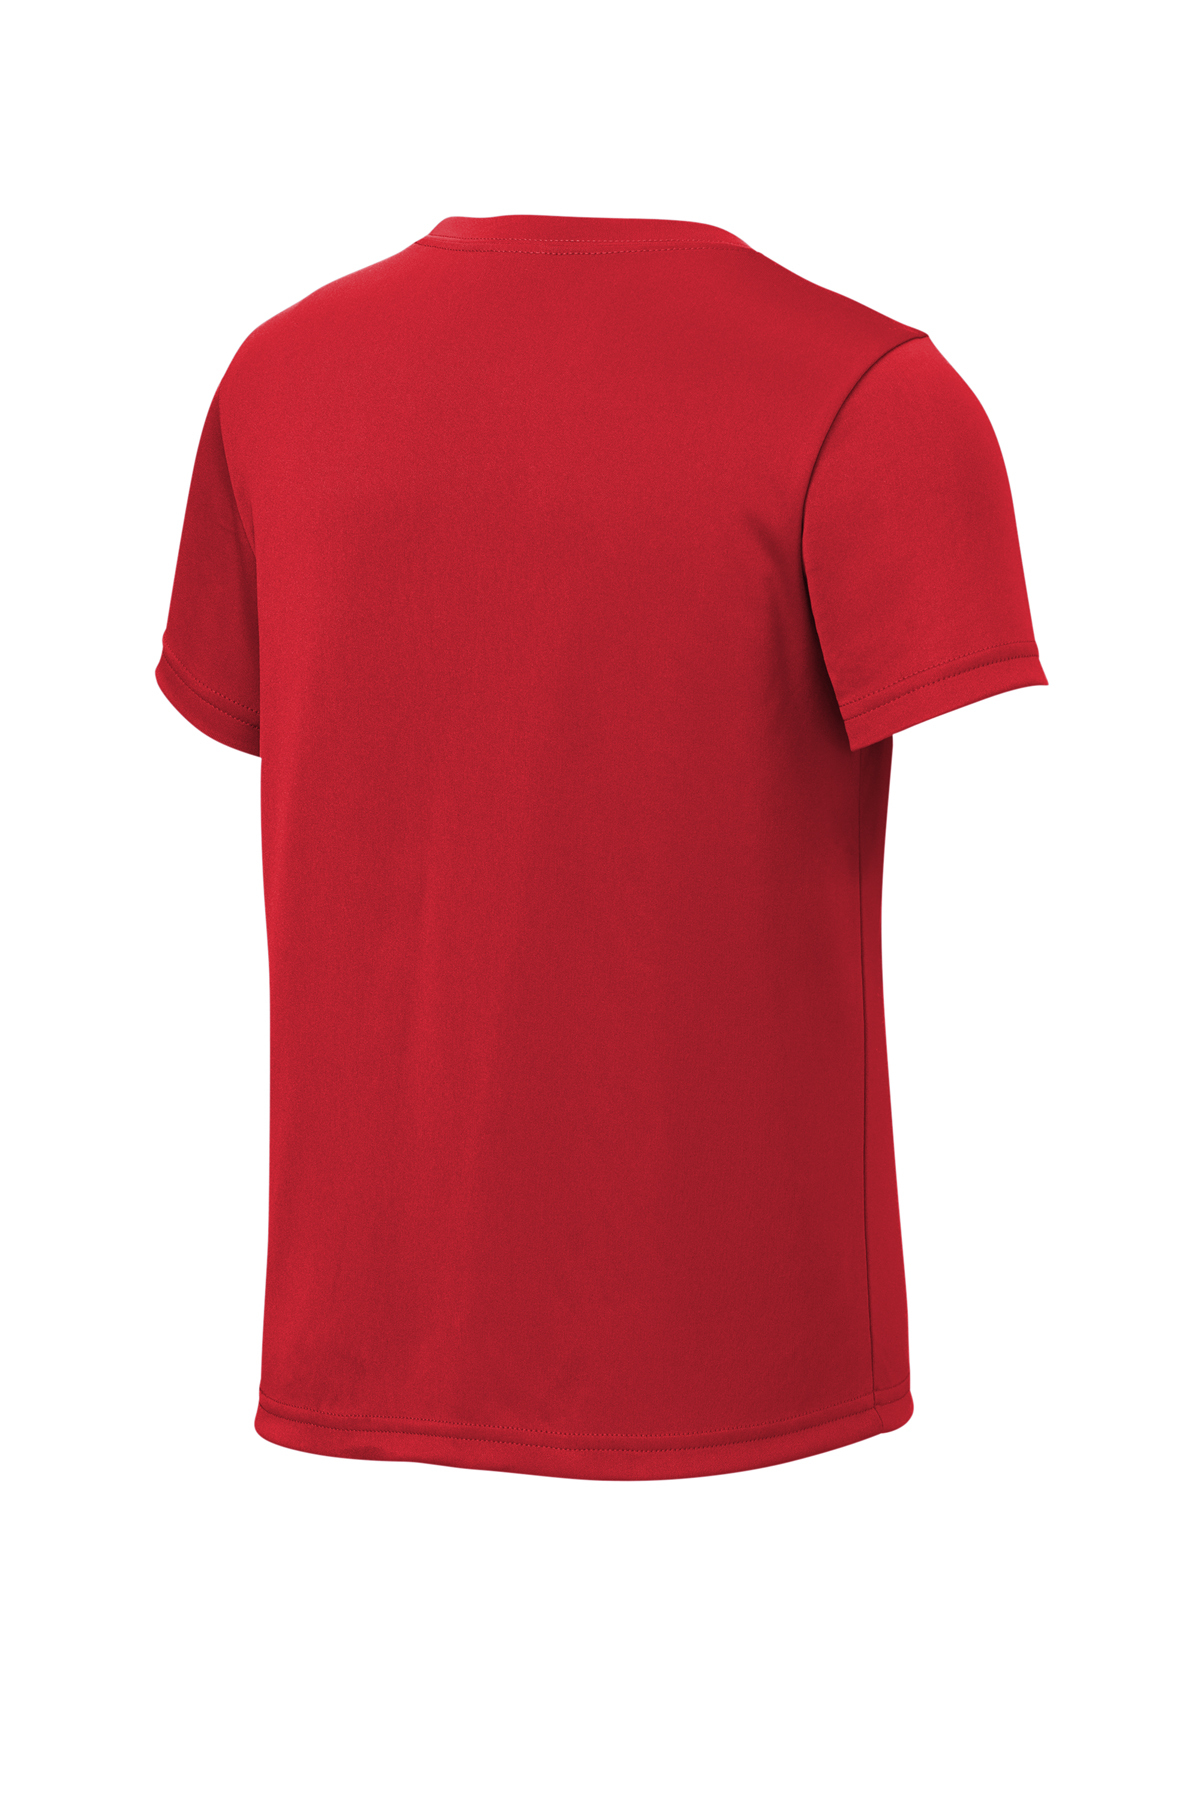 Sport-Tek Youth PosiCharge Re-Compete Tee | Product | SanMar